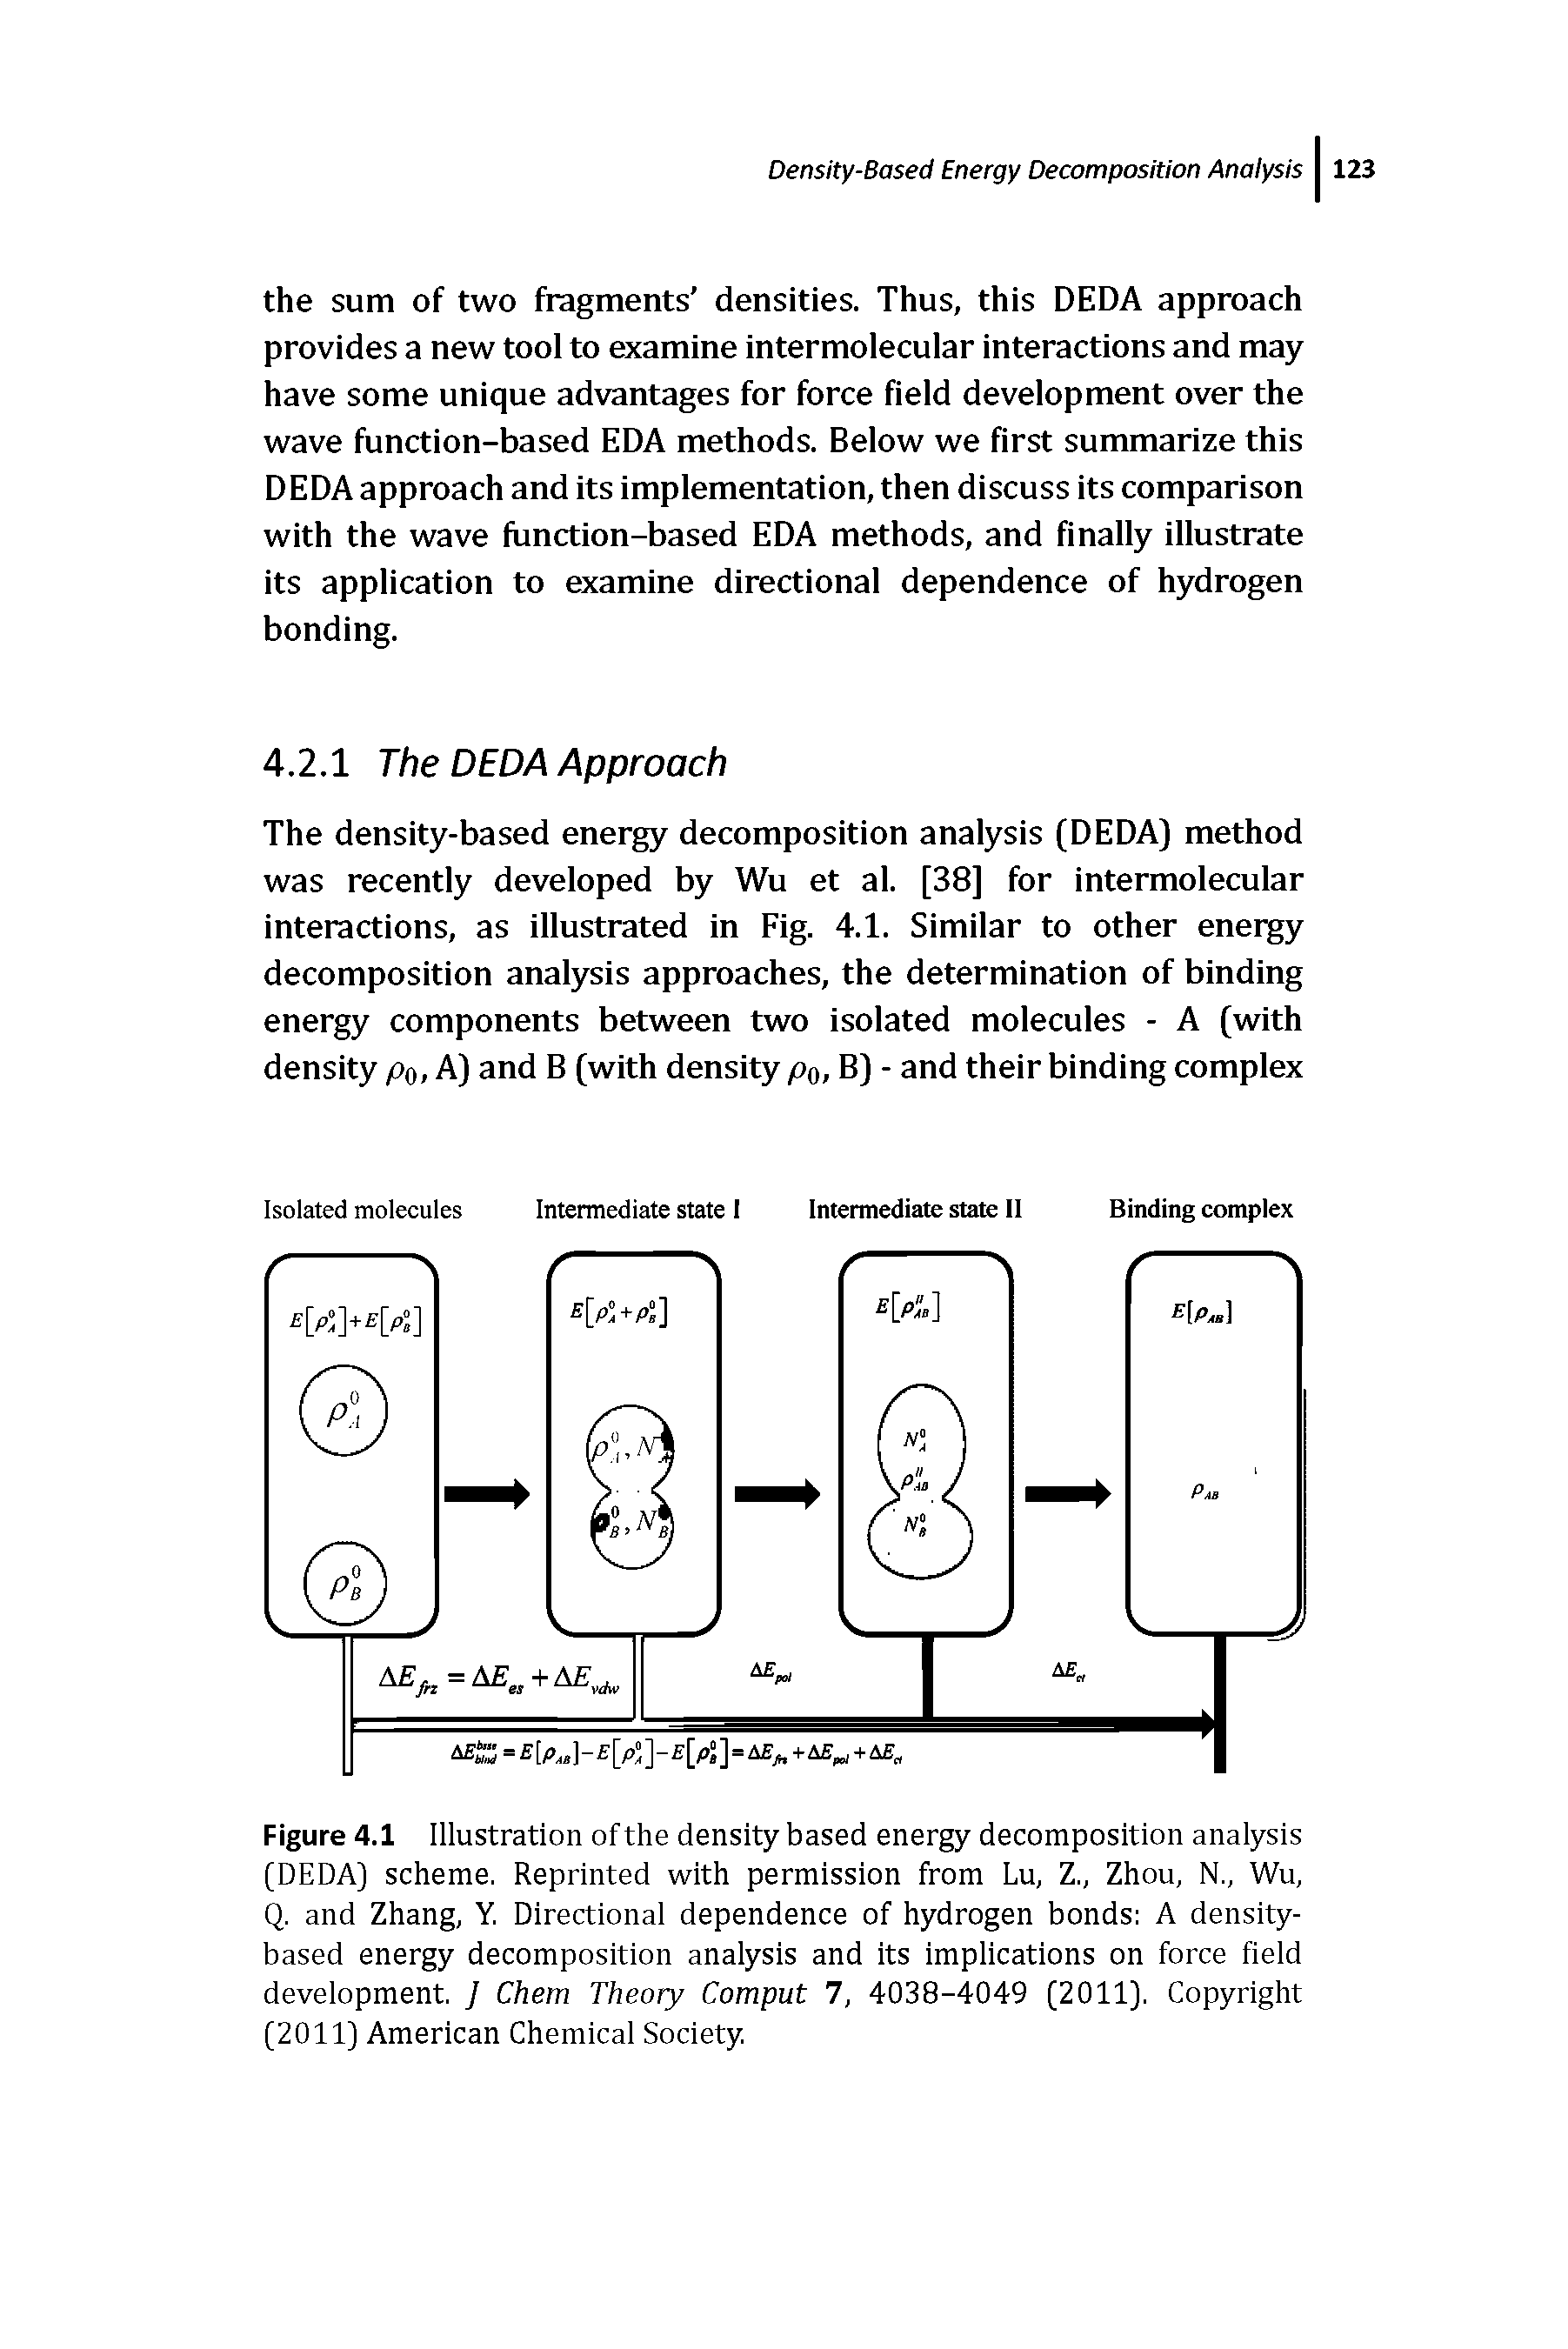 Figure 4.1 Illustration of the density based energy decomposition analysis (DEDA) scheme. Reprinted with permission from Lu, Z., Zhou, N., Wu, Q. and Zhang, Y. Directional dependence of hydrogen bonds A density-based energy decomposition analysis and its implications on force field development. J Chem Theory Comput 7, 4038-4049 (2011). Copyright (2011) American Chemical Society.